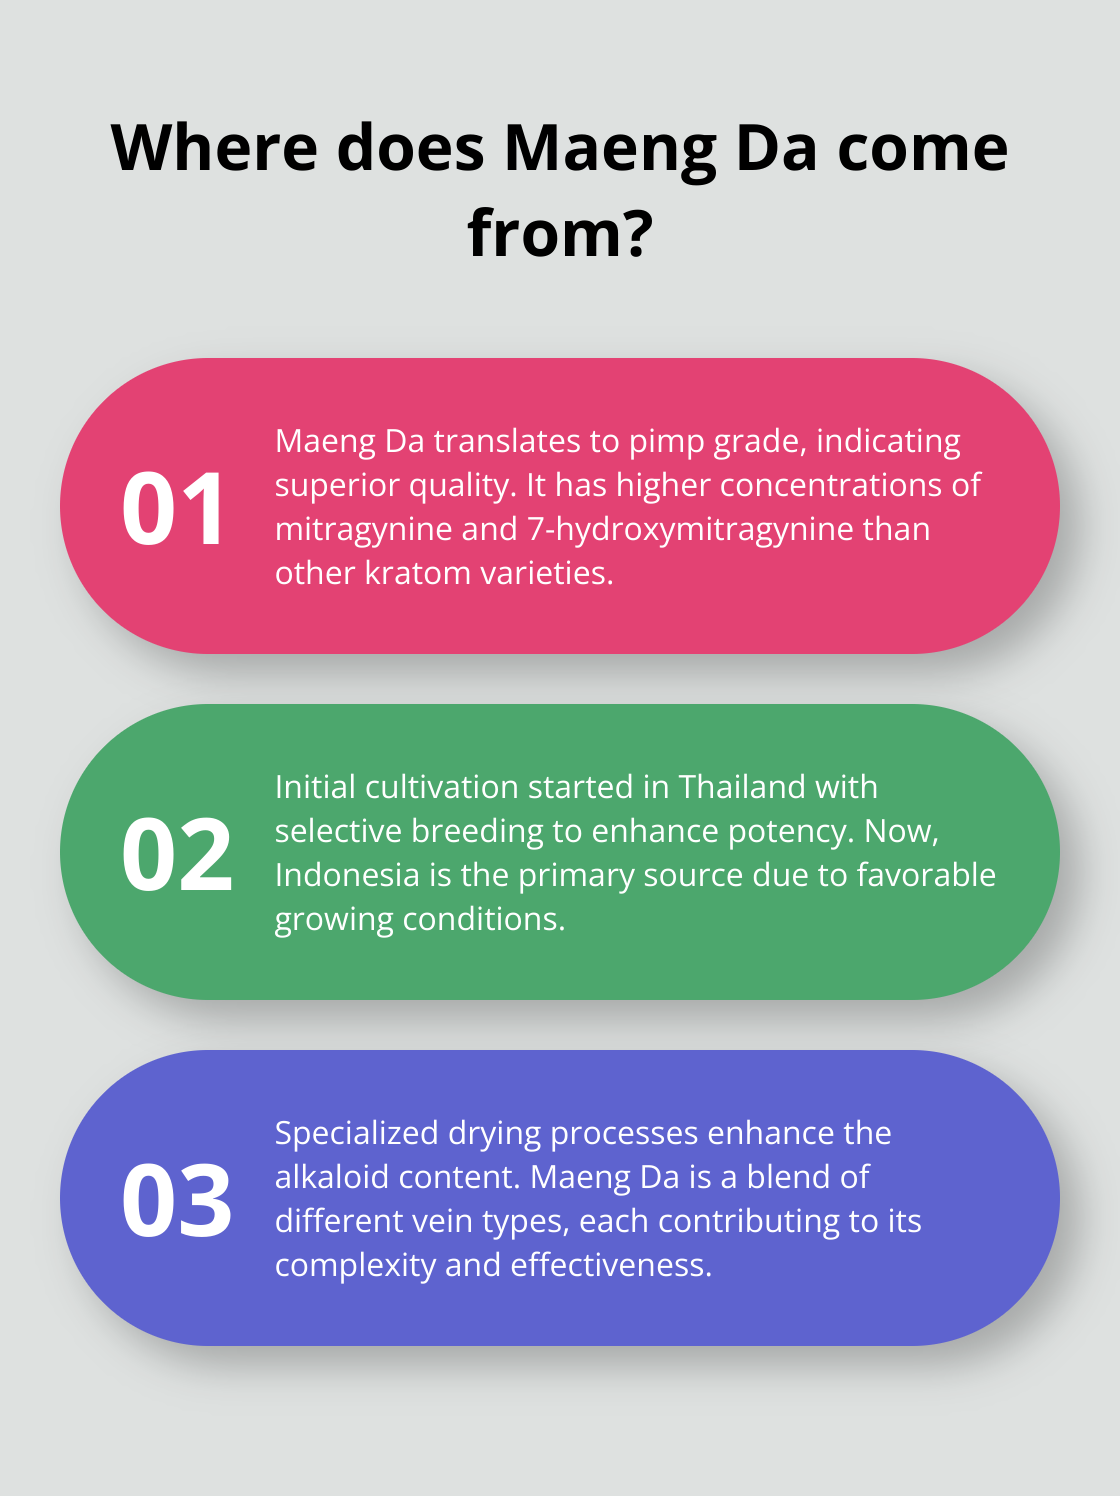 Fact - Where does Maeng Da come from?